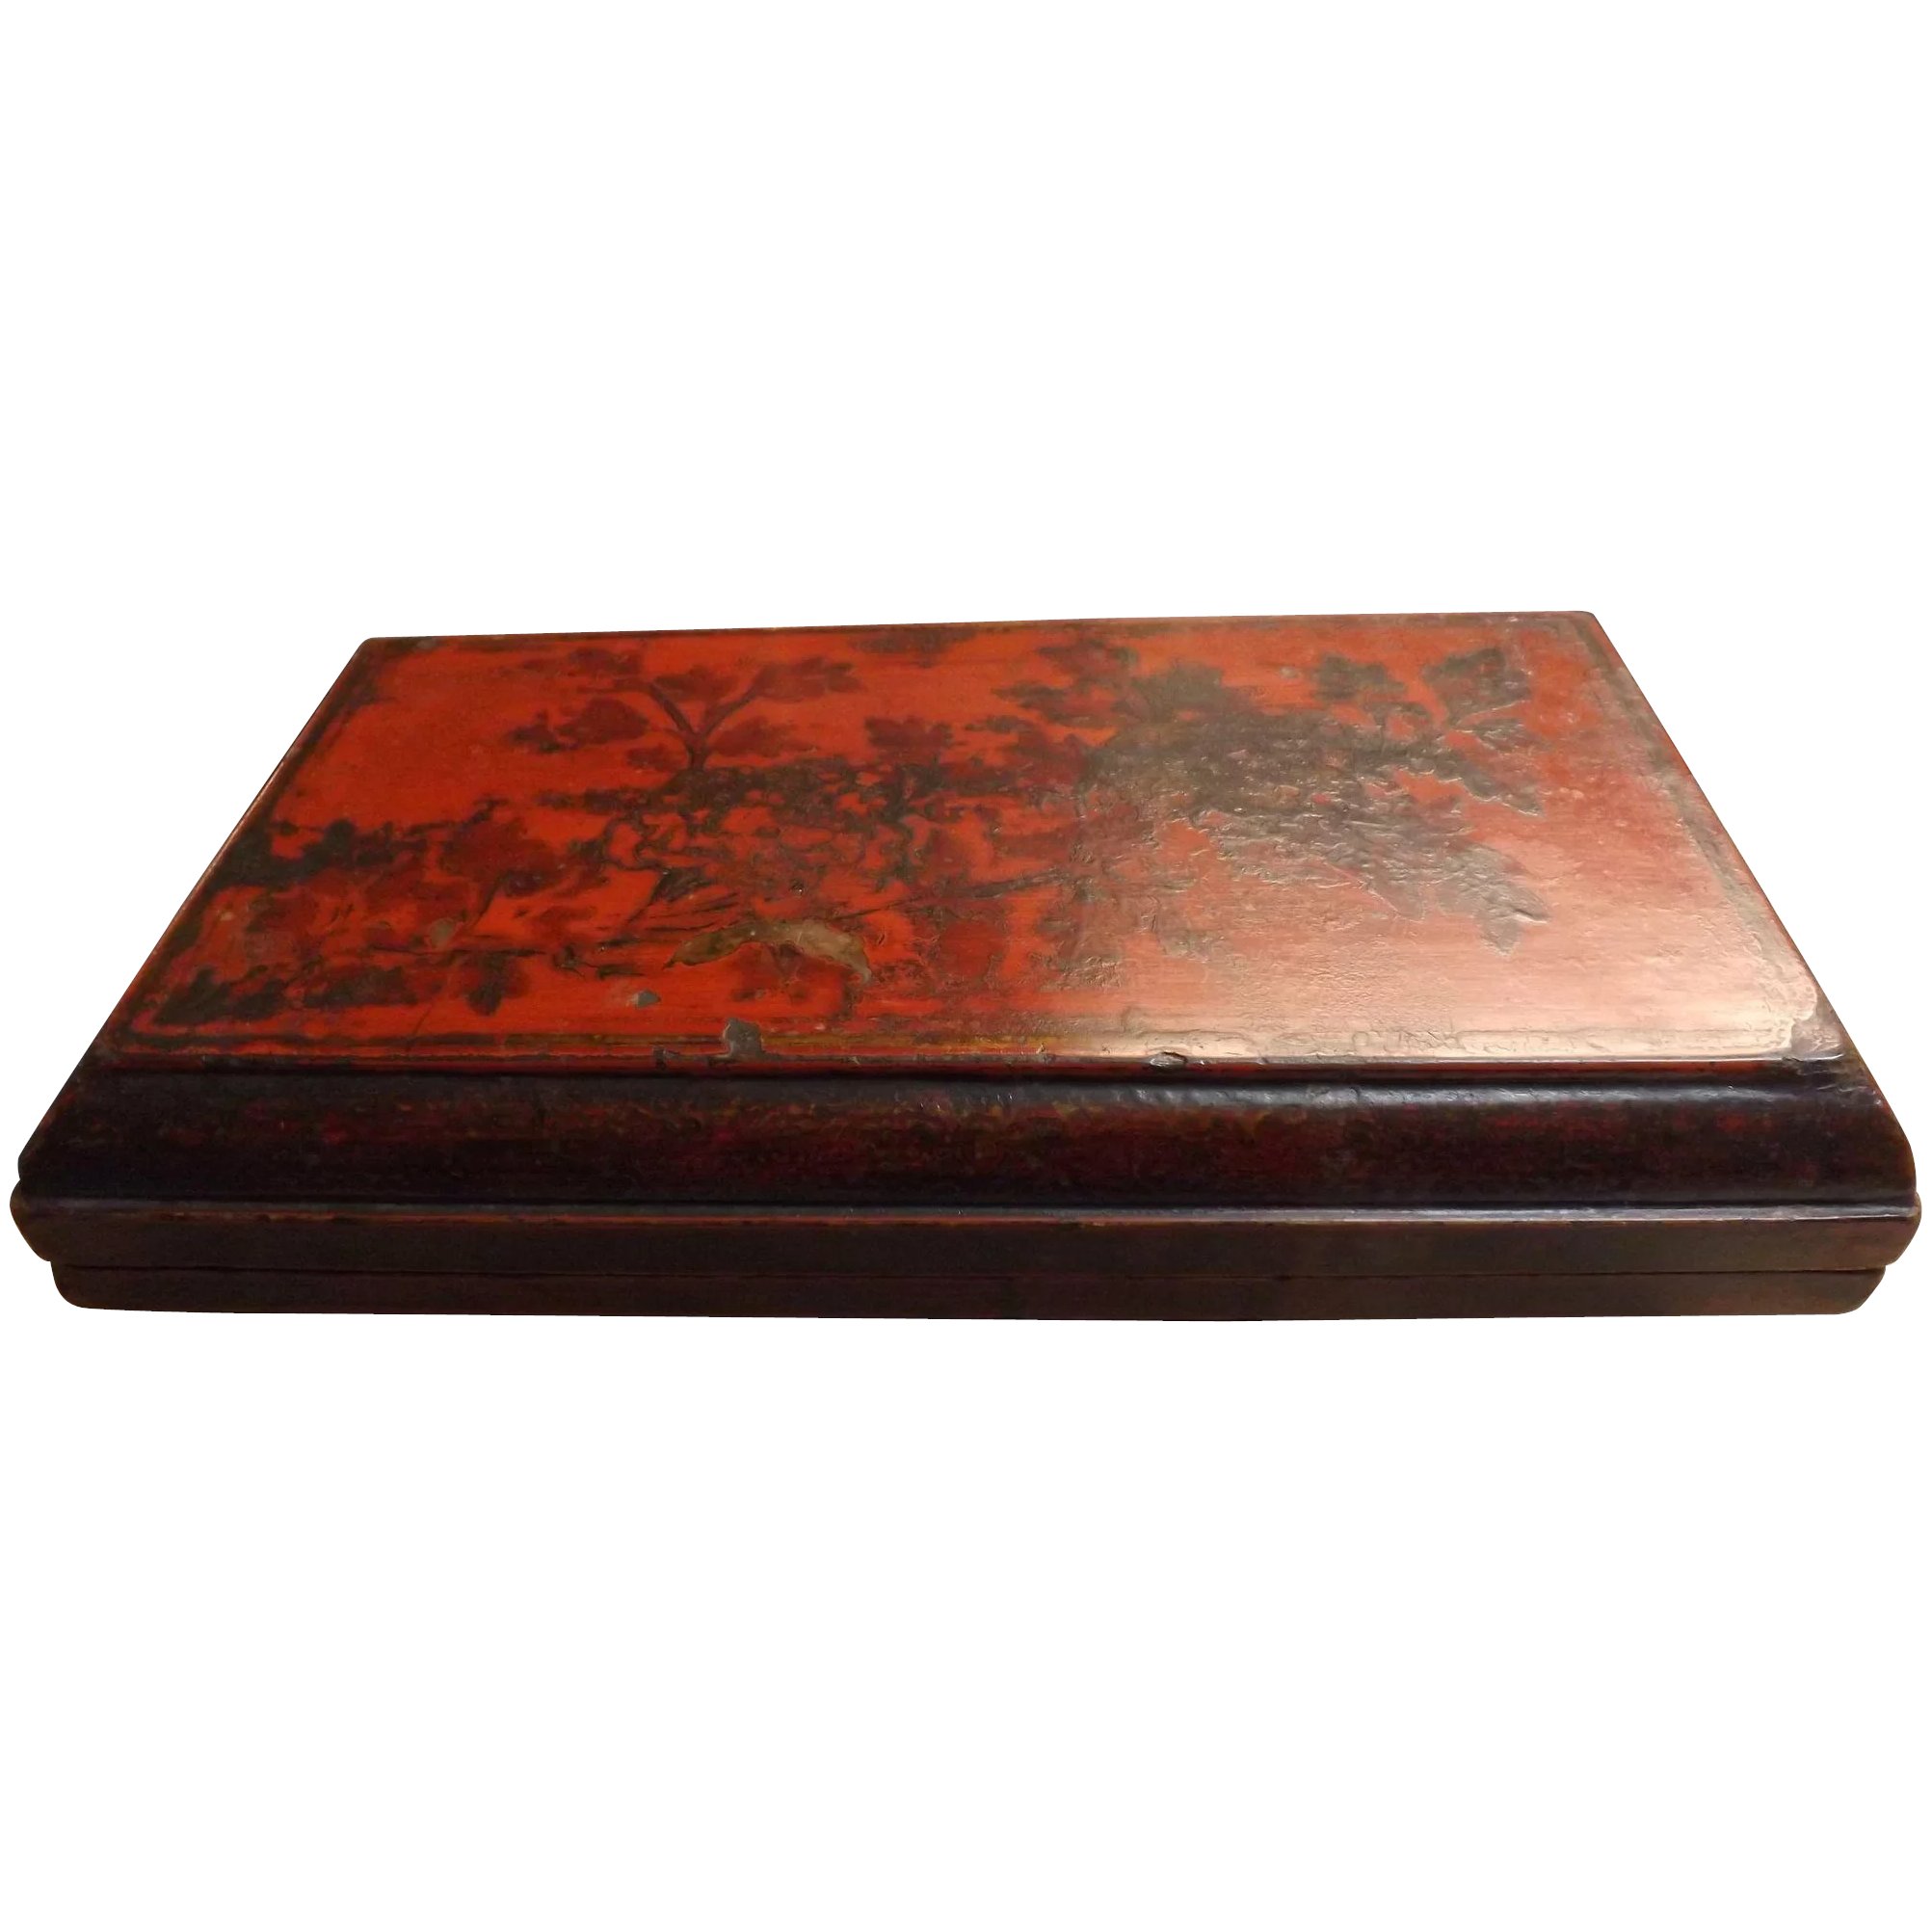 Quing Dynasty Presentation Box - Decorated Wood & Lacquer